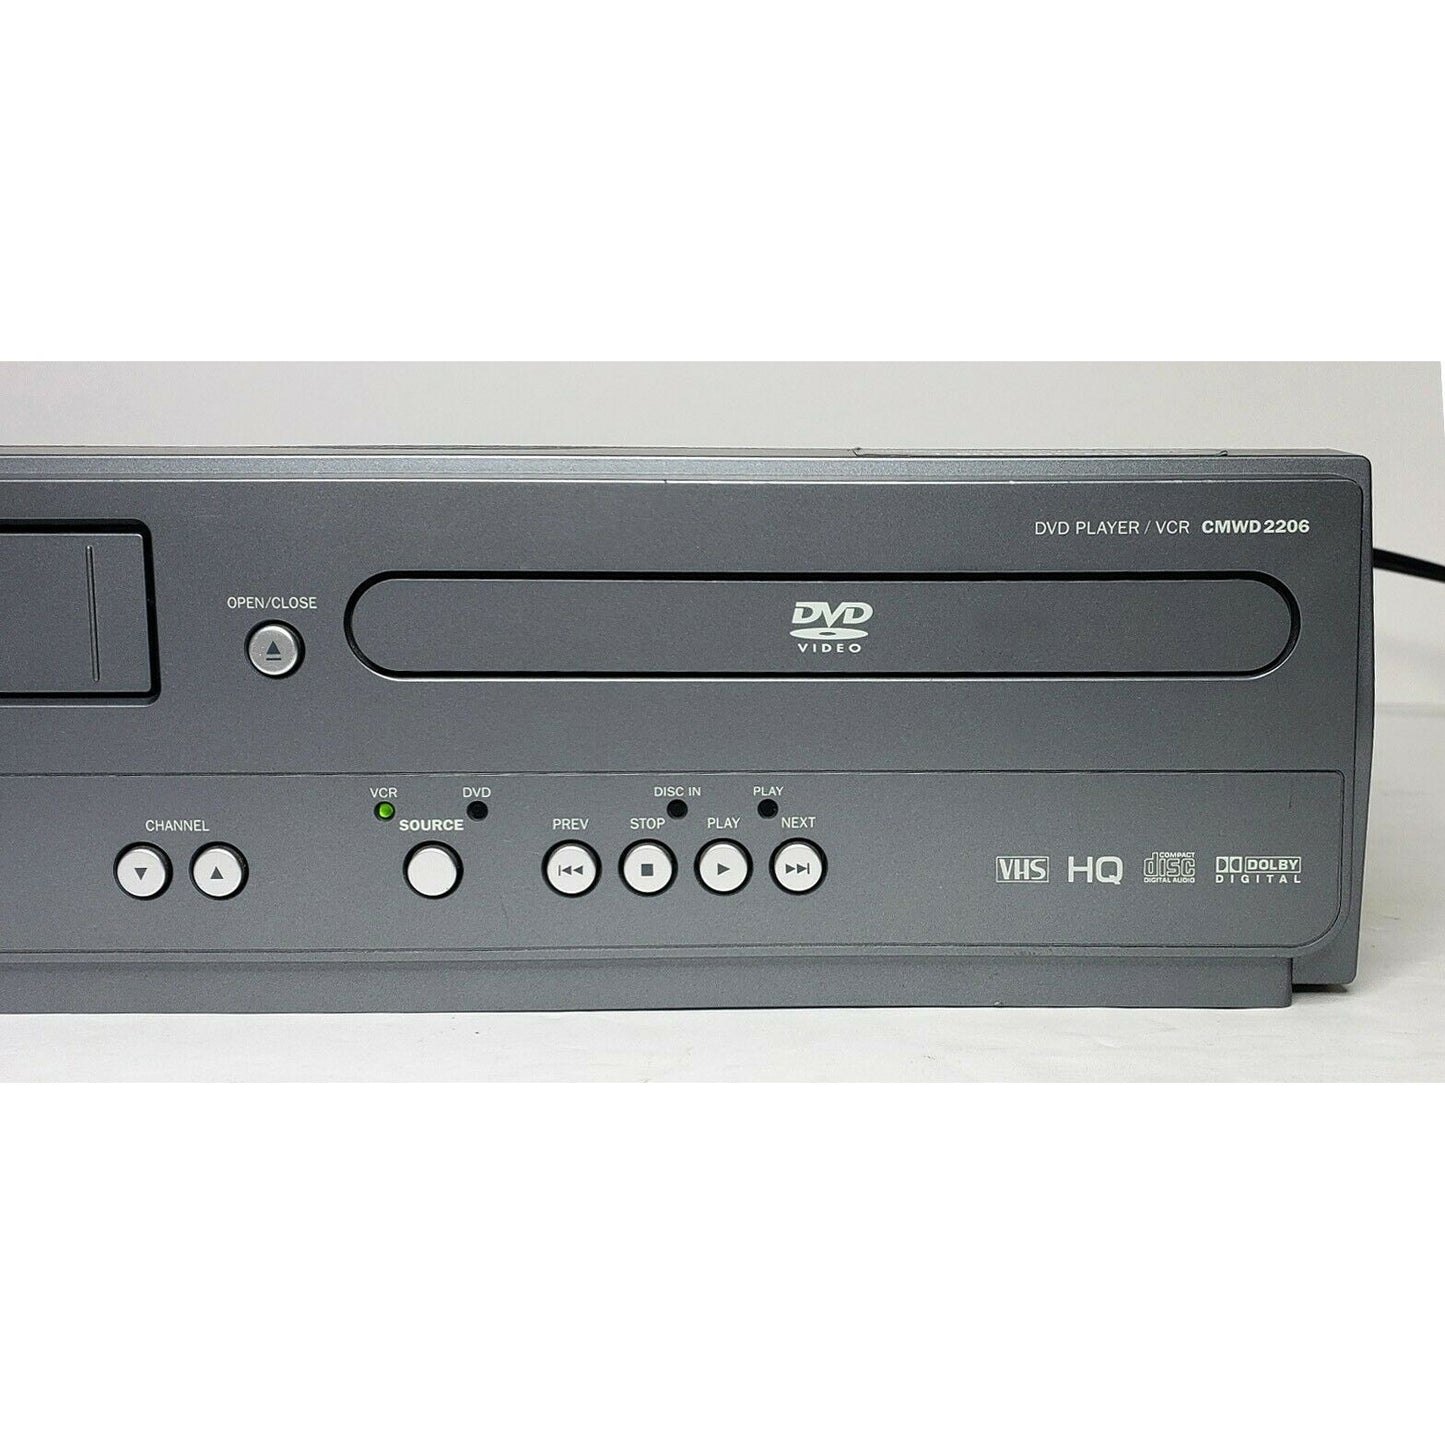 Magnavox CMWD2206 VCR/DVD Player Combo - Right Detail